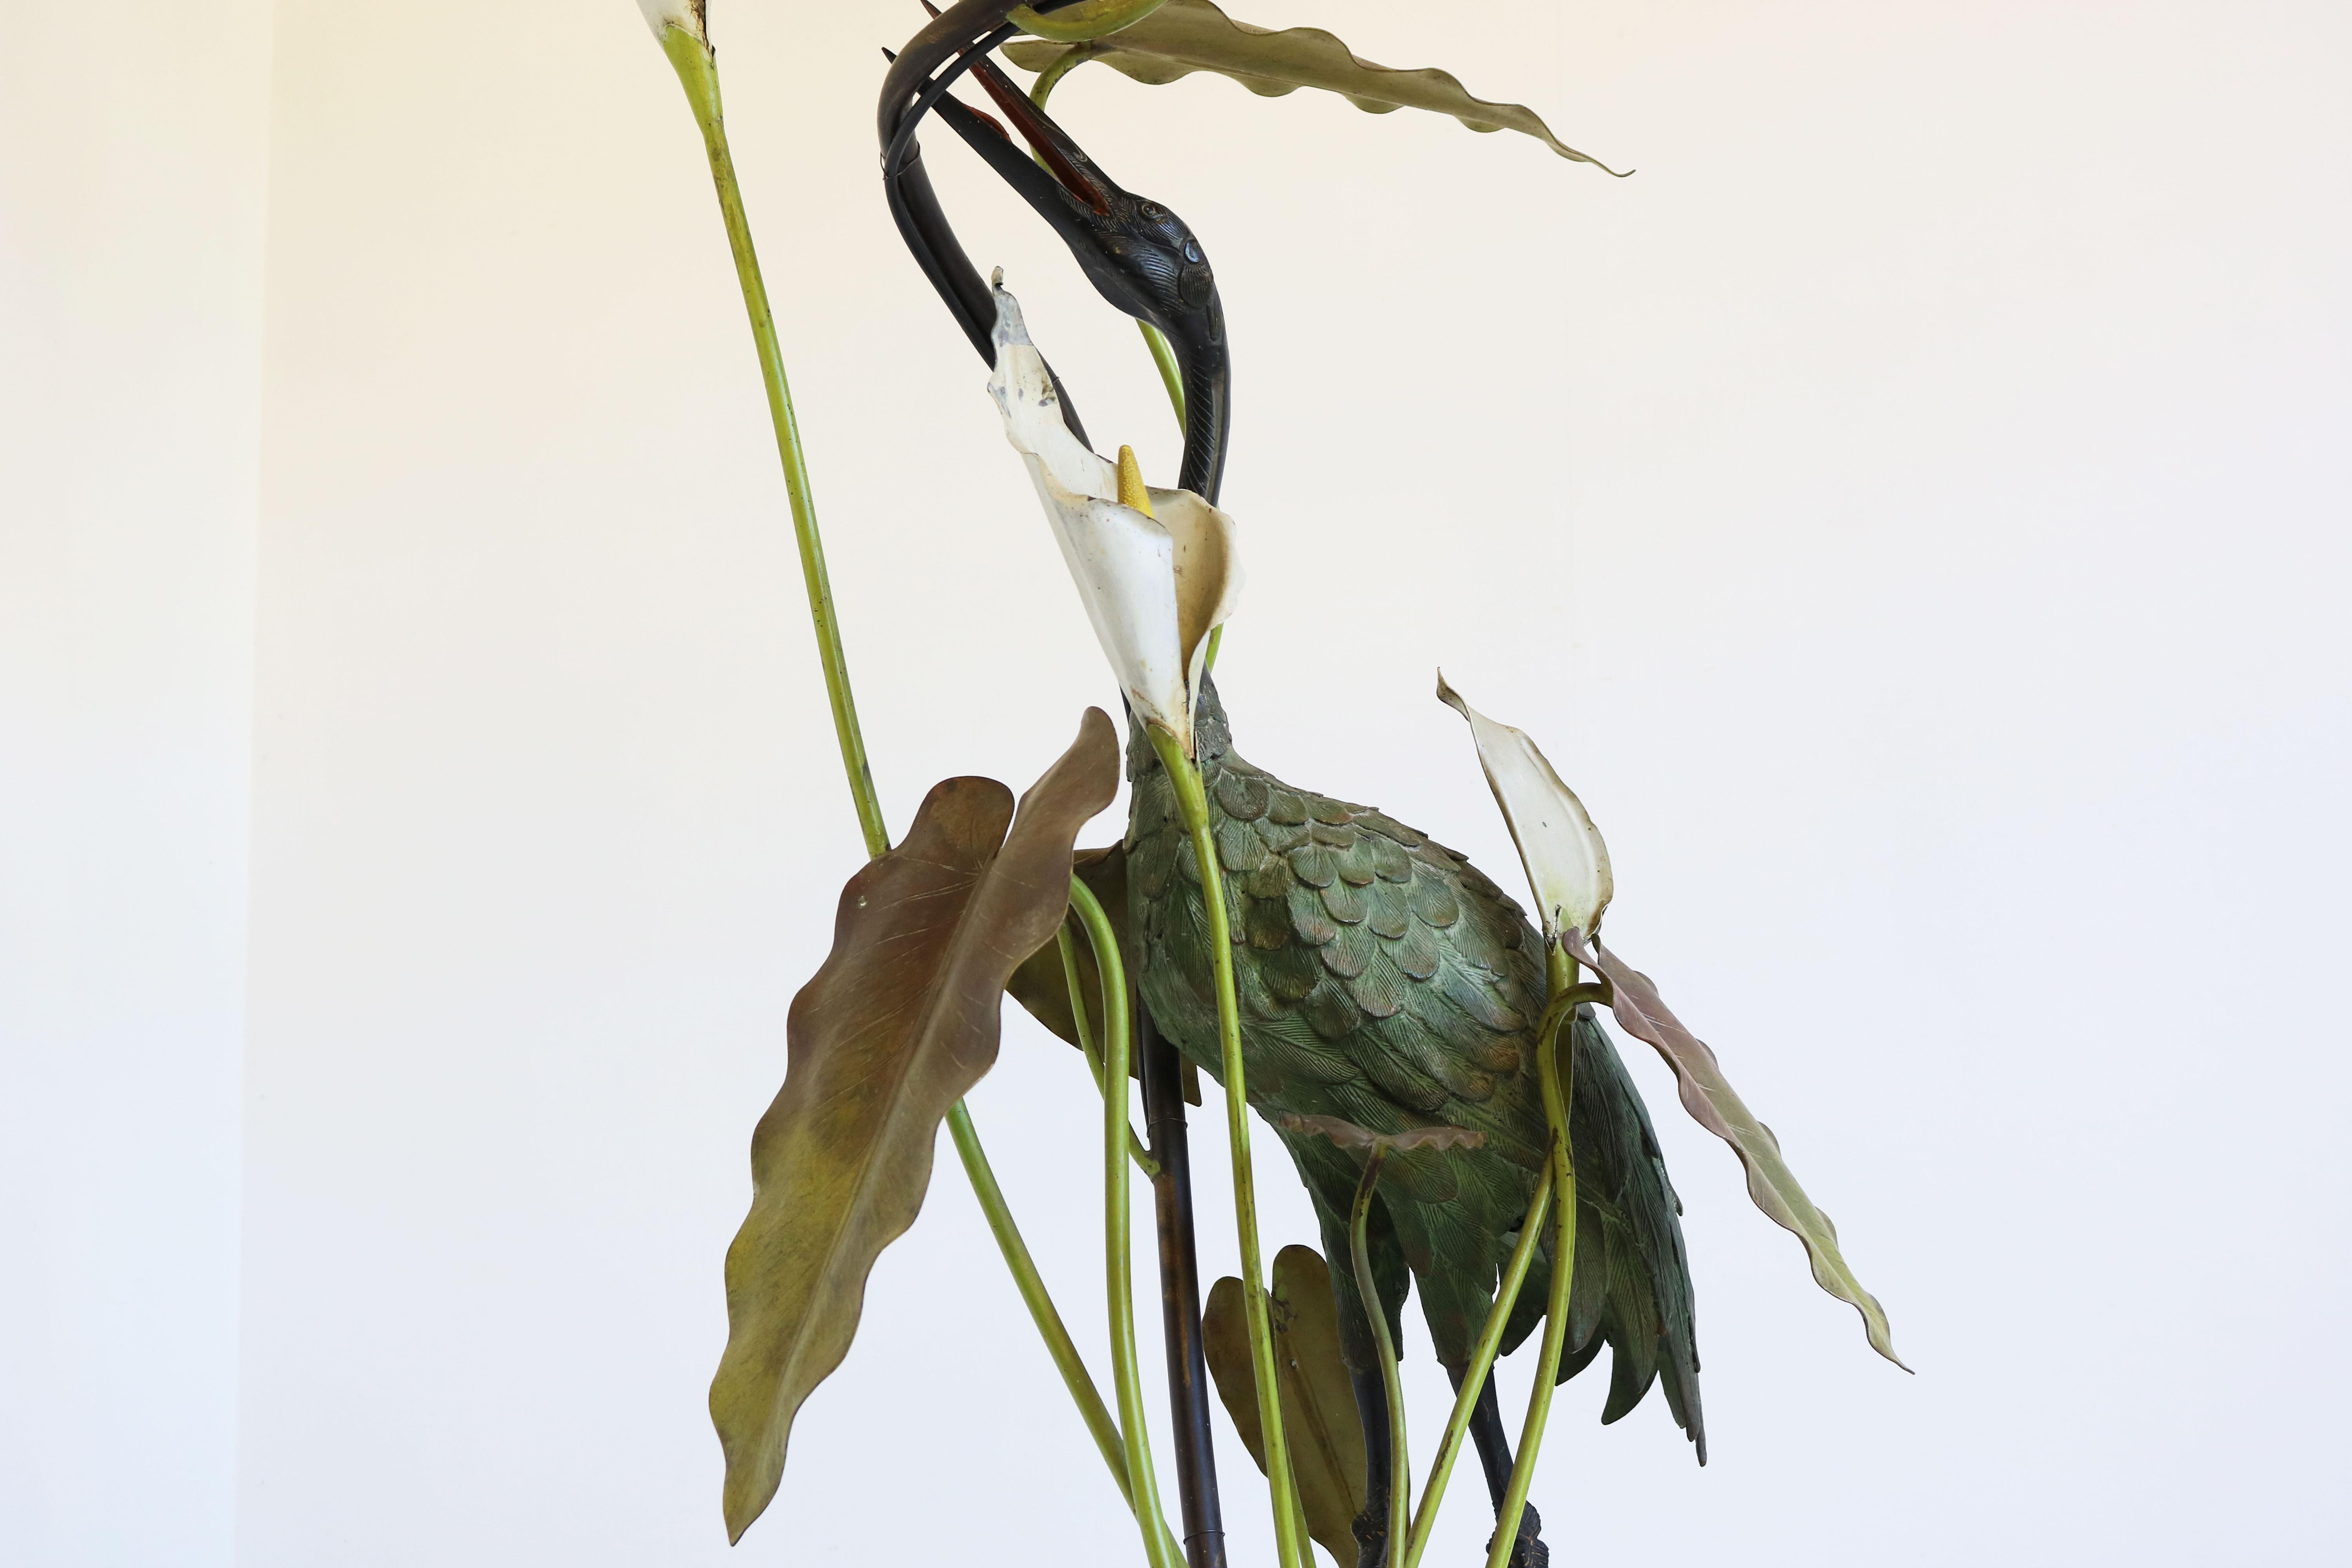 Exquisite & rare! This French Art Nouveau floor lamp in patinated bronze displaying a Heron between Leaves & Lilly pads, dated early 1900. 
The Heron stands above a stream of water hidden between the leaves & flowers. Amazing Art Nouveau design.